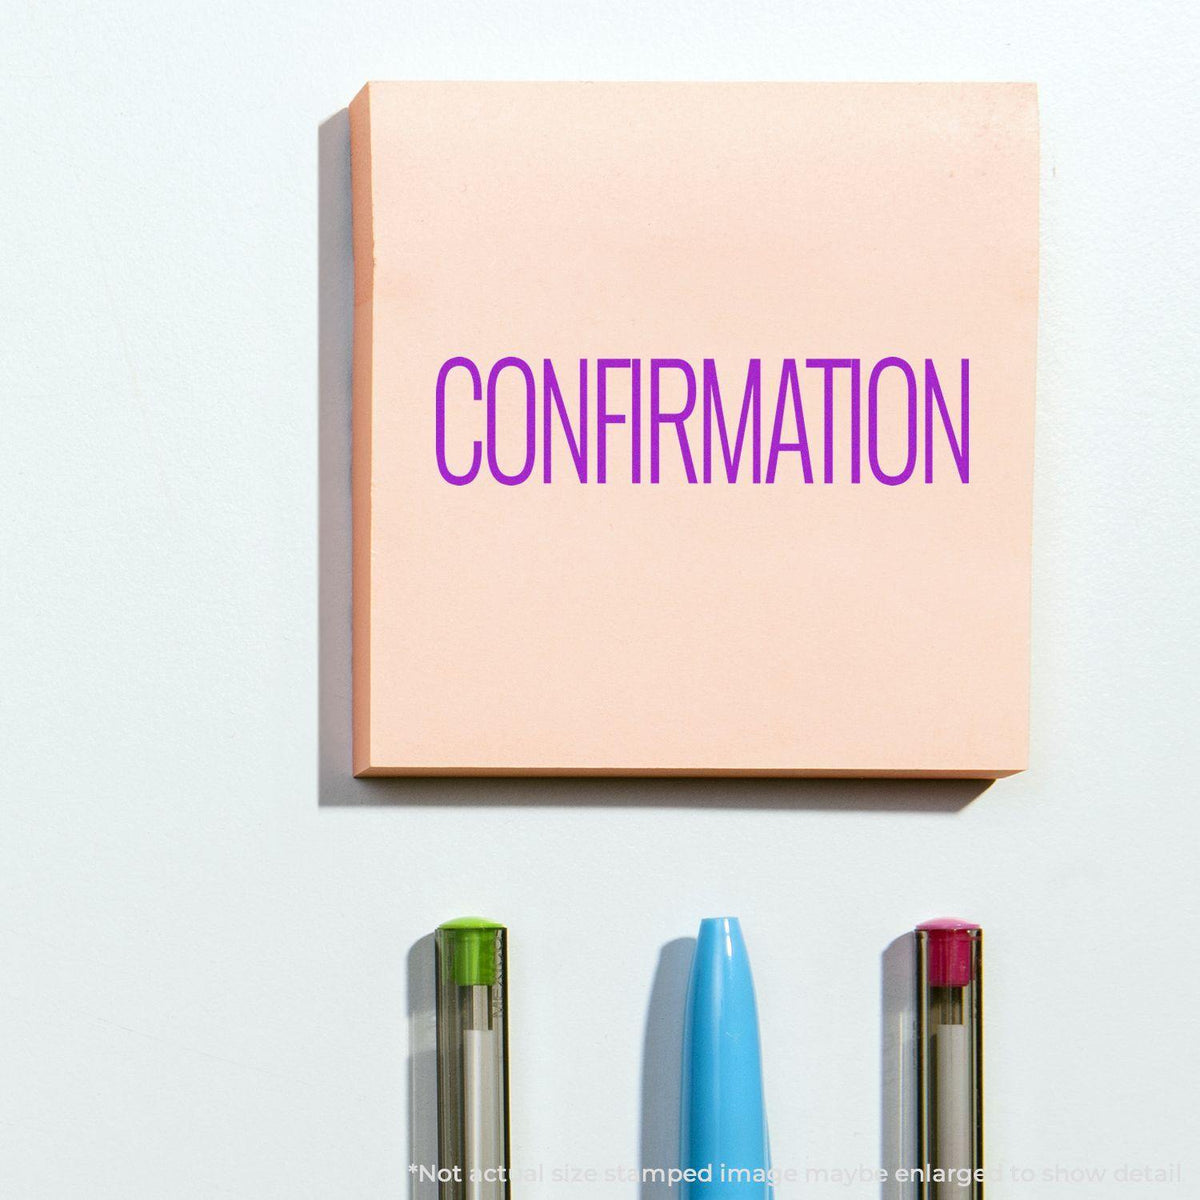 Confirmation Rubber Stamp Lifestyle Photo